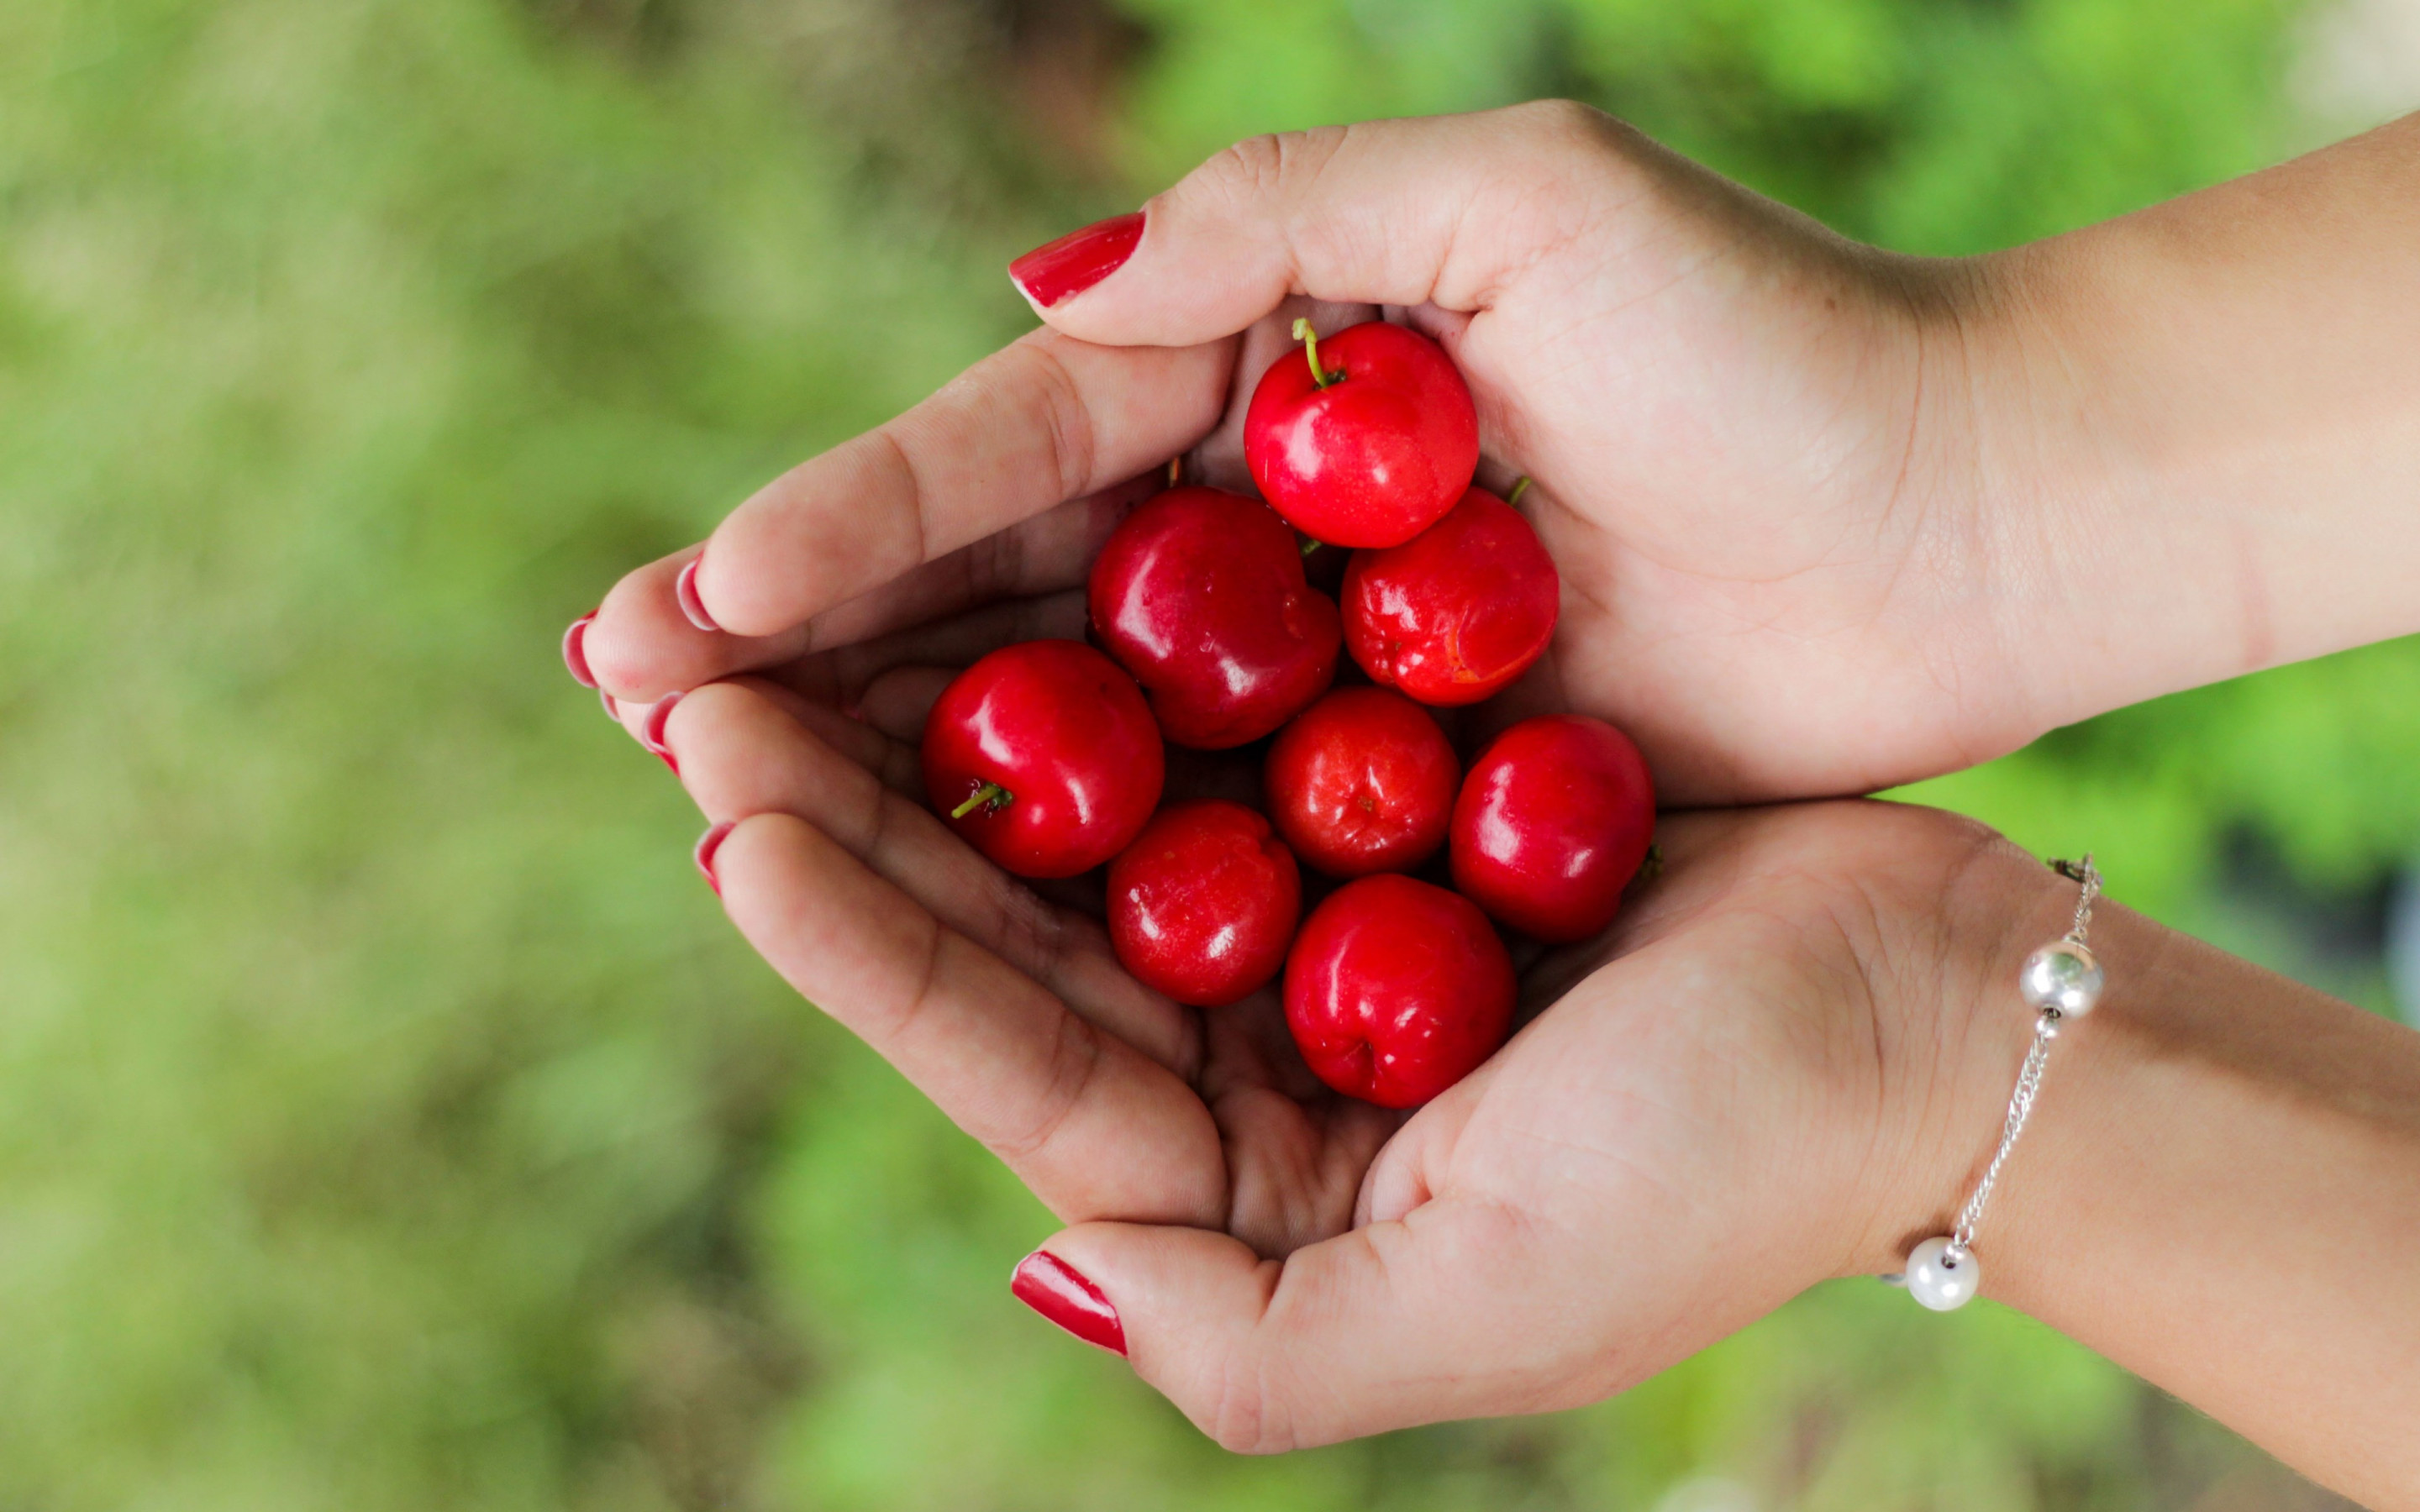 Hands filled with cherries wallpaper 2880x1800